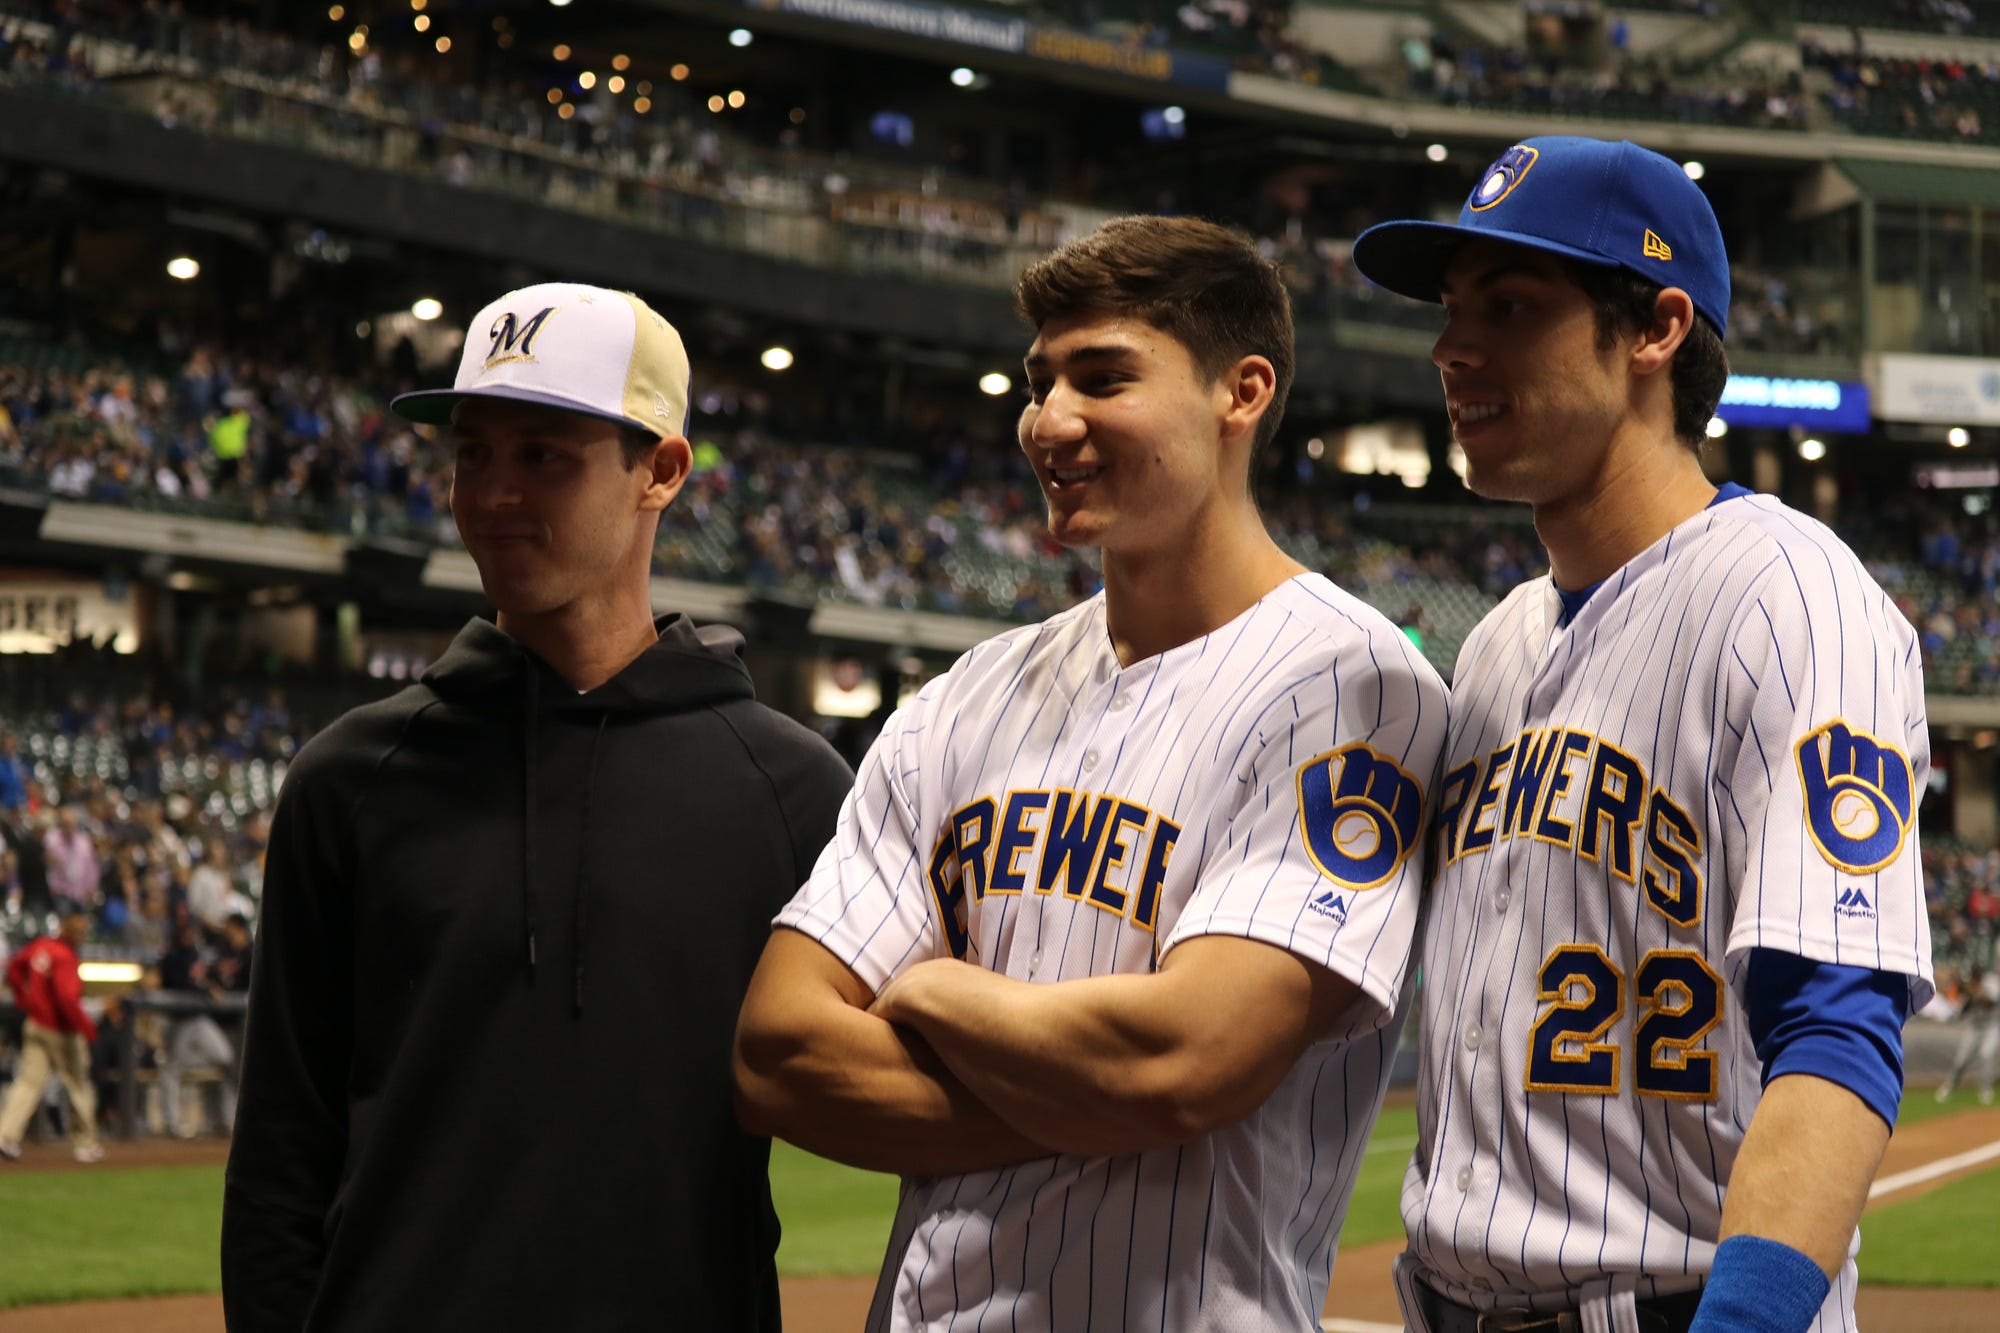 Cameron Yelich Throws Ceremonial First Pitch, by Caitlin Moyer